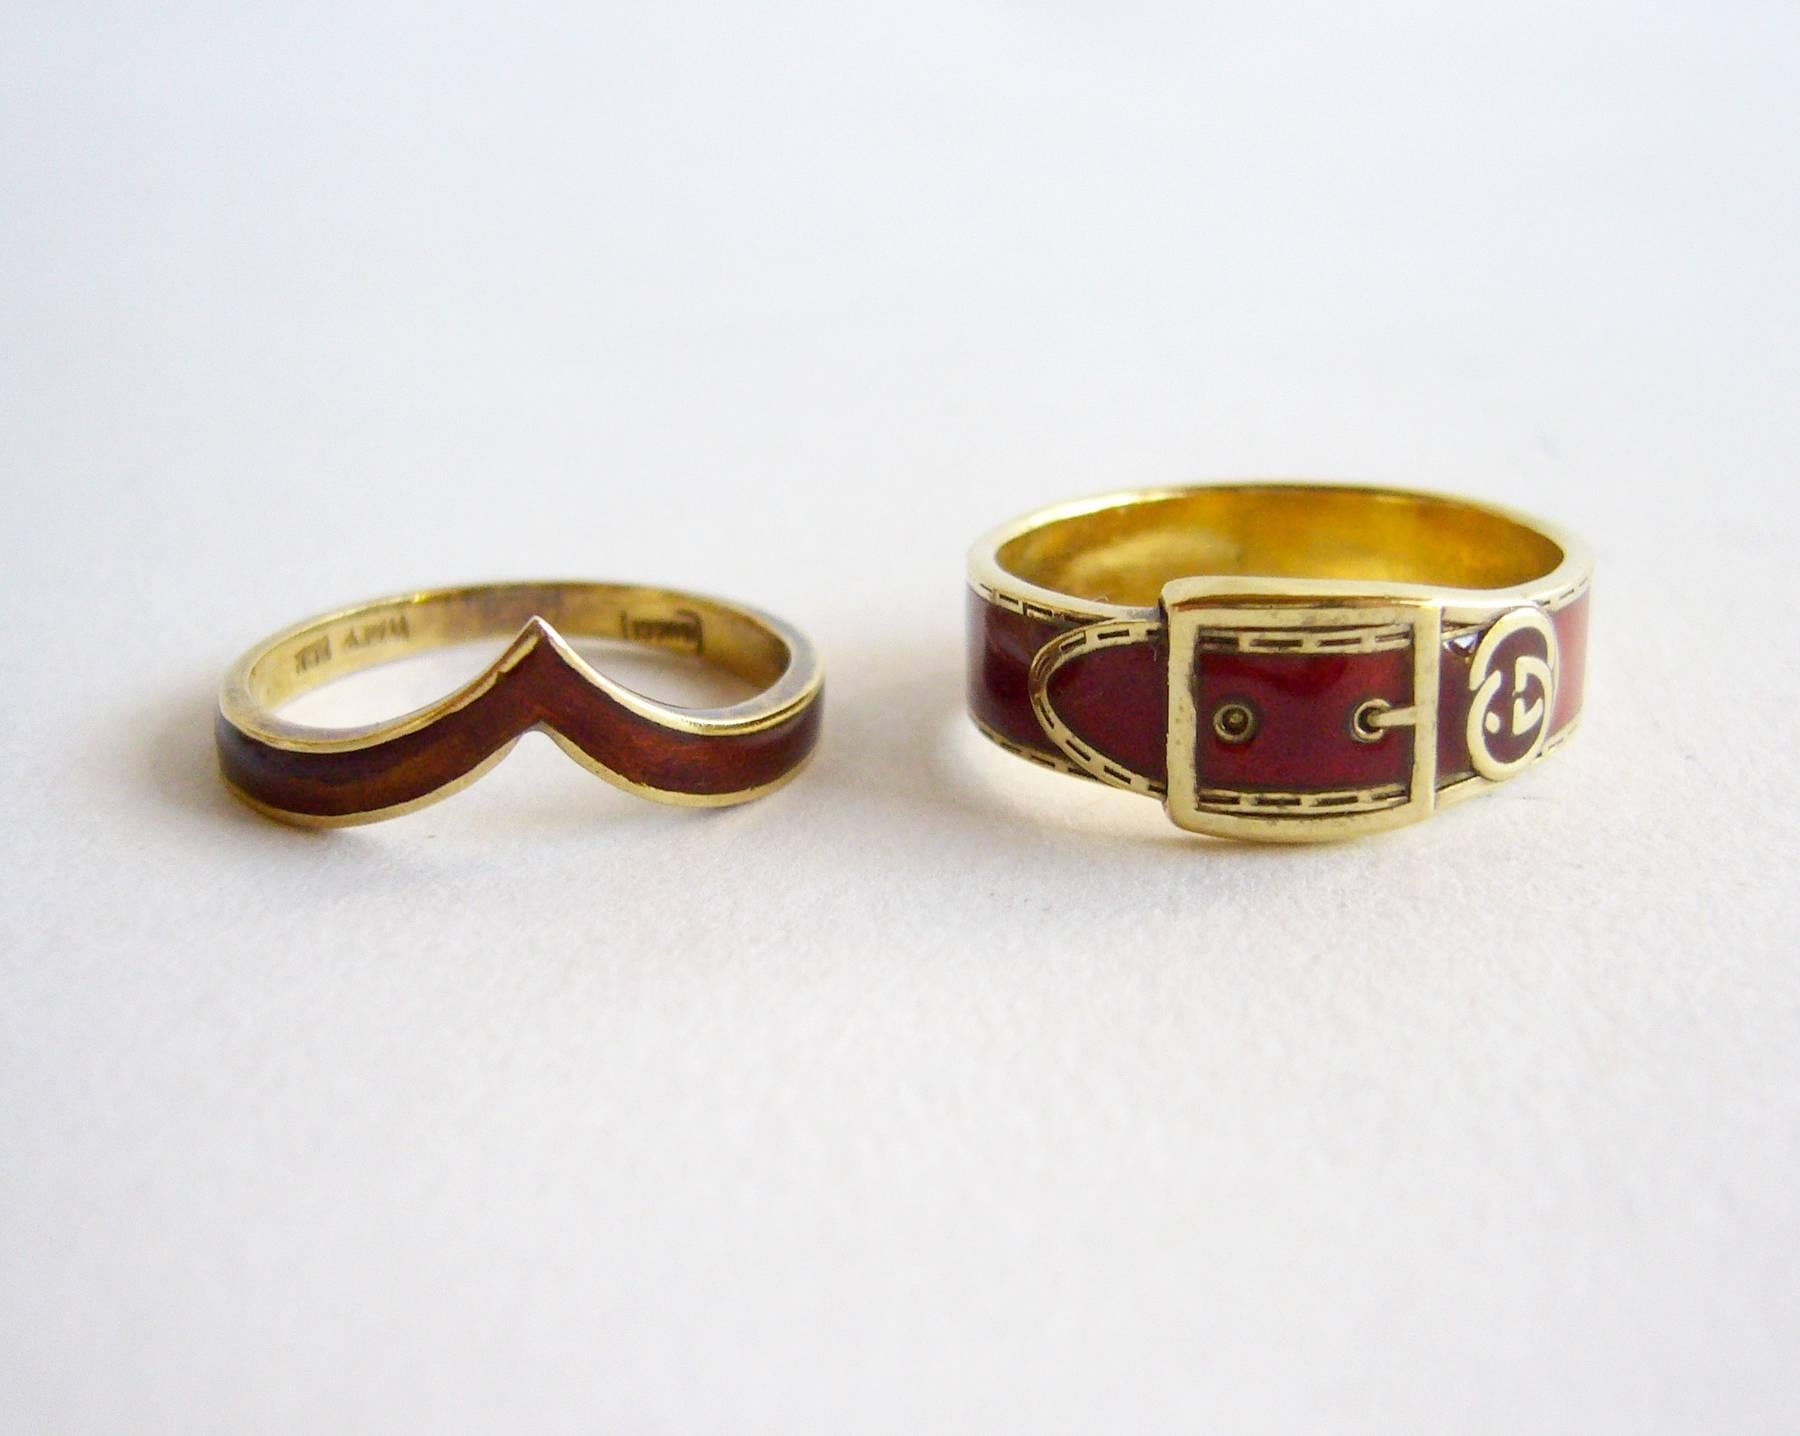 Pair of stackable 18k gold and enamel vintage band rings by Gucci of Italy.  Rings are a finger size 5.5 and 6 and are signed 18k, Gucci, Italy.  In excellent vintage condition.